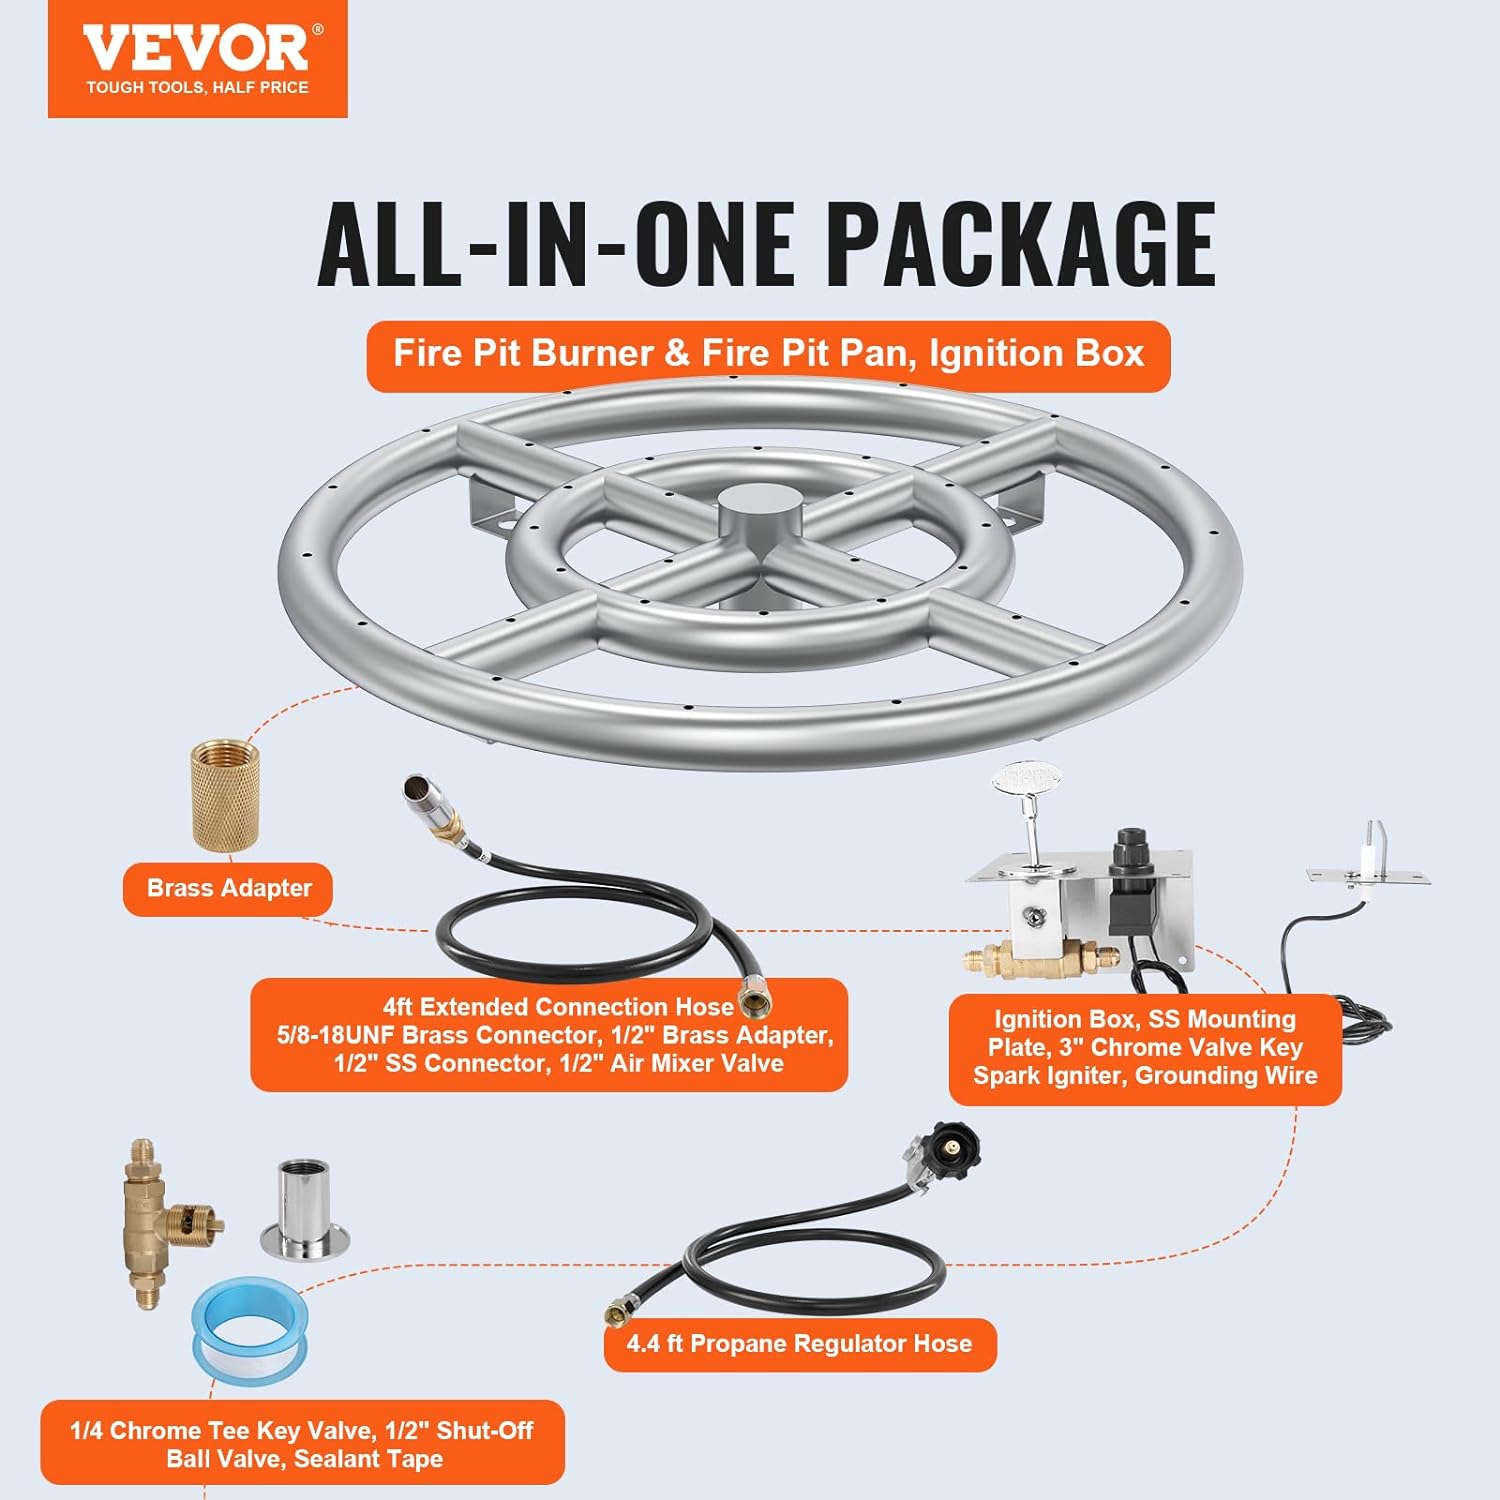 VEVOR 12 inch Round Drop-in Fire Pit Pan, Stainless Steel Fire Pit Burner Kit, Propane Gas Fire Pan with 92,000 BTU for Indoor or Outdoor Use